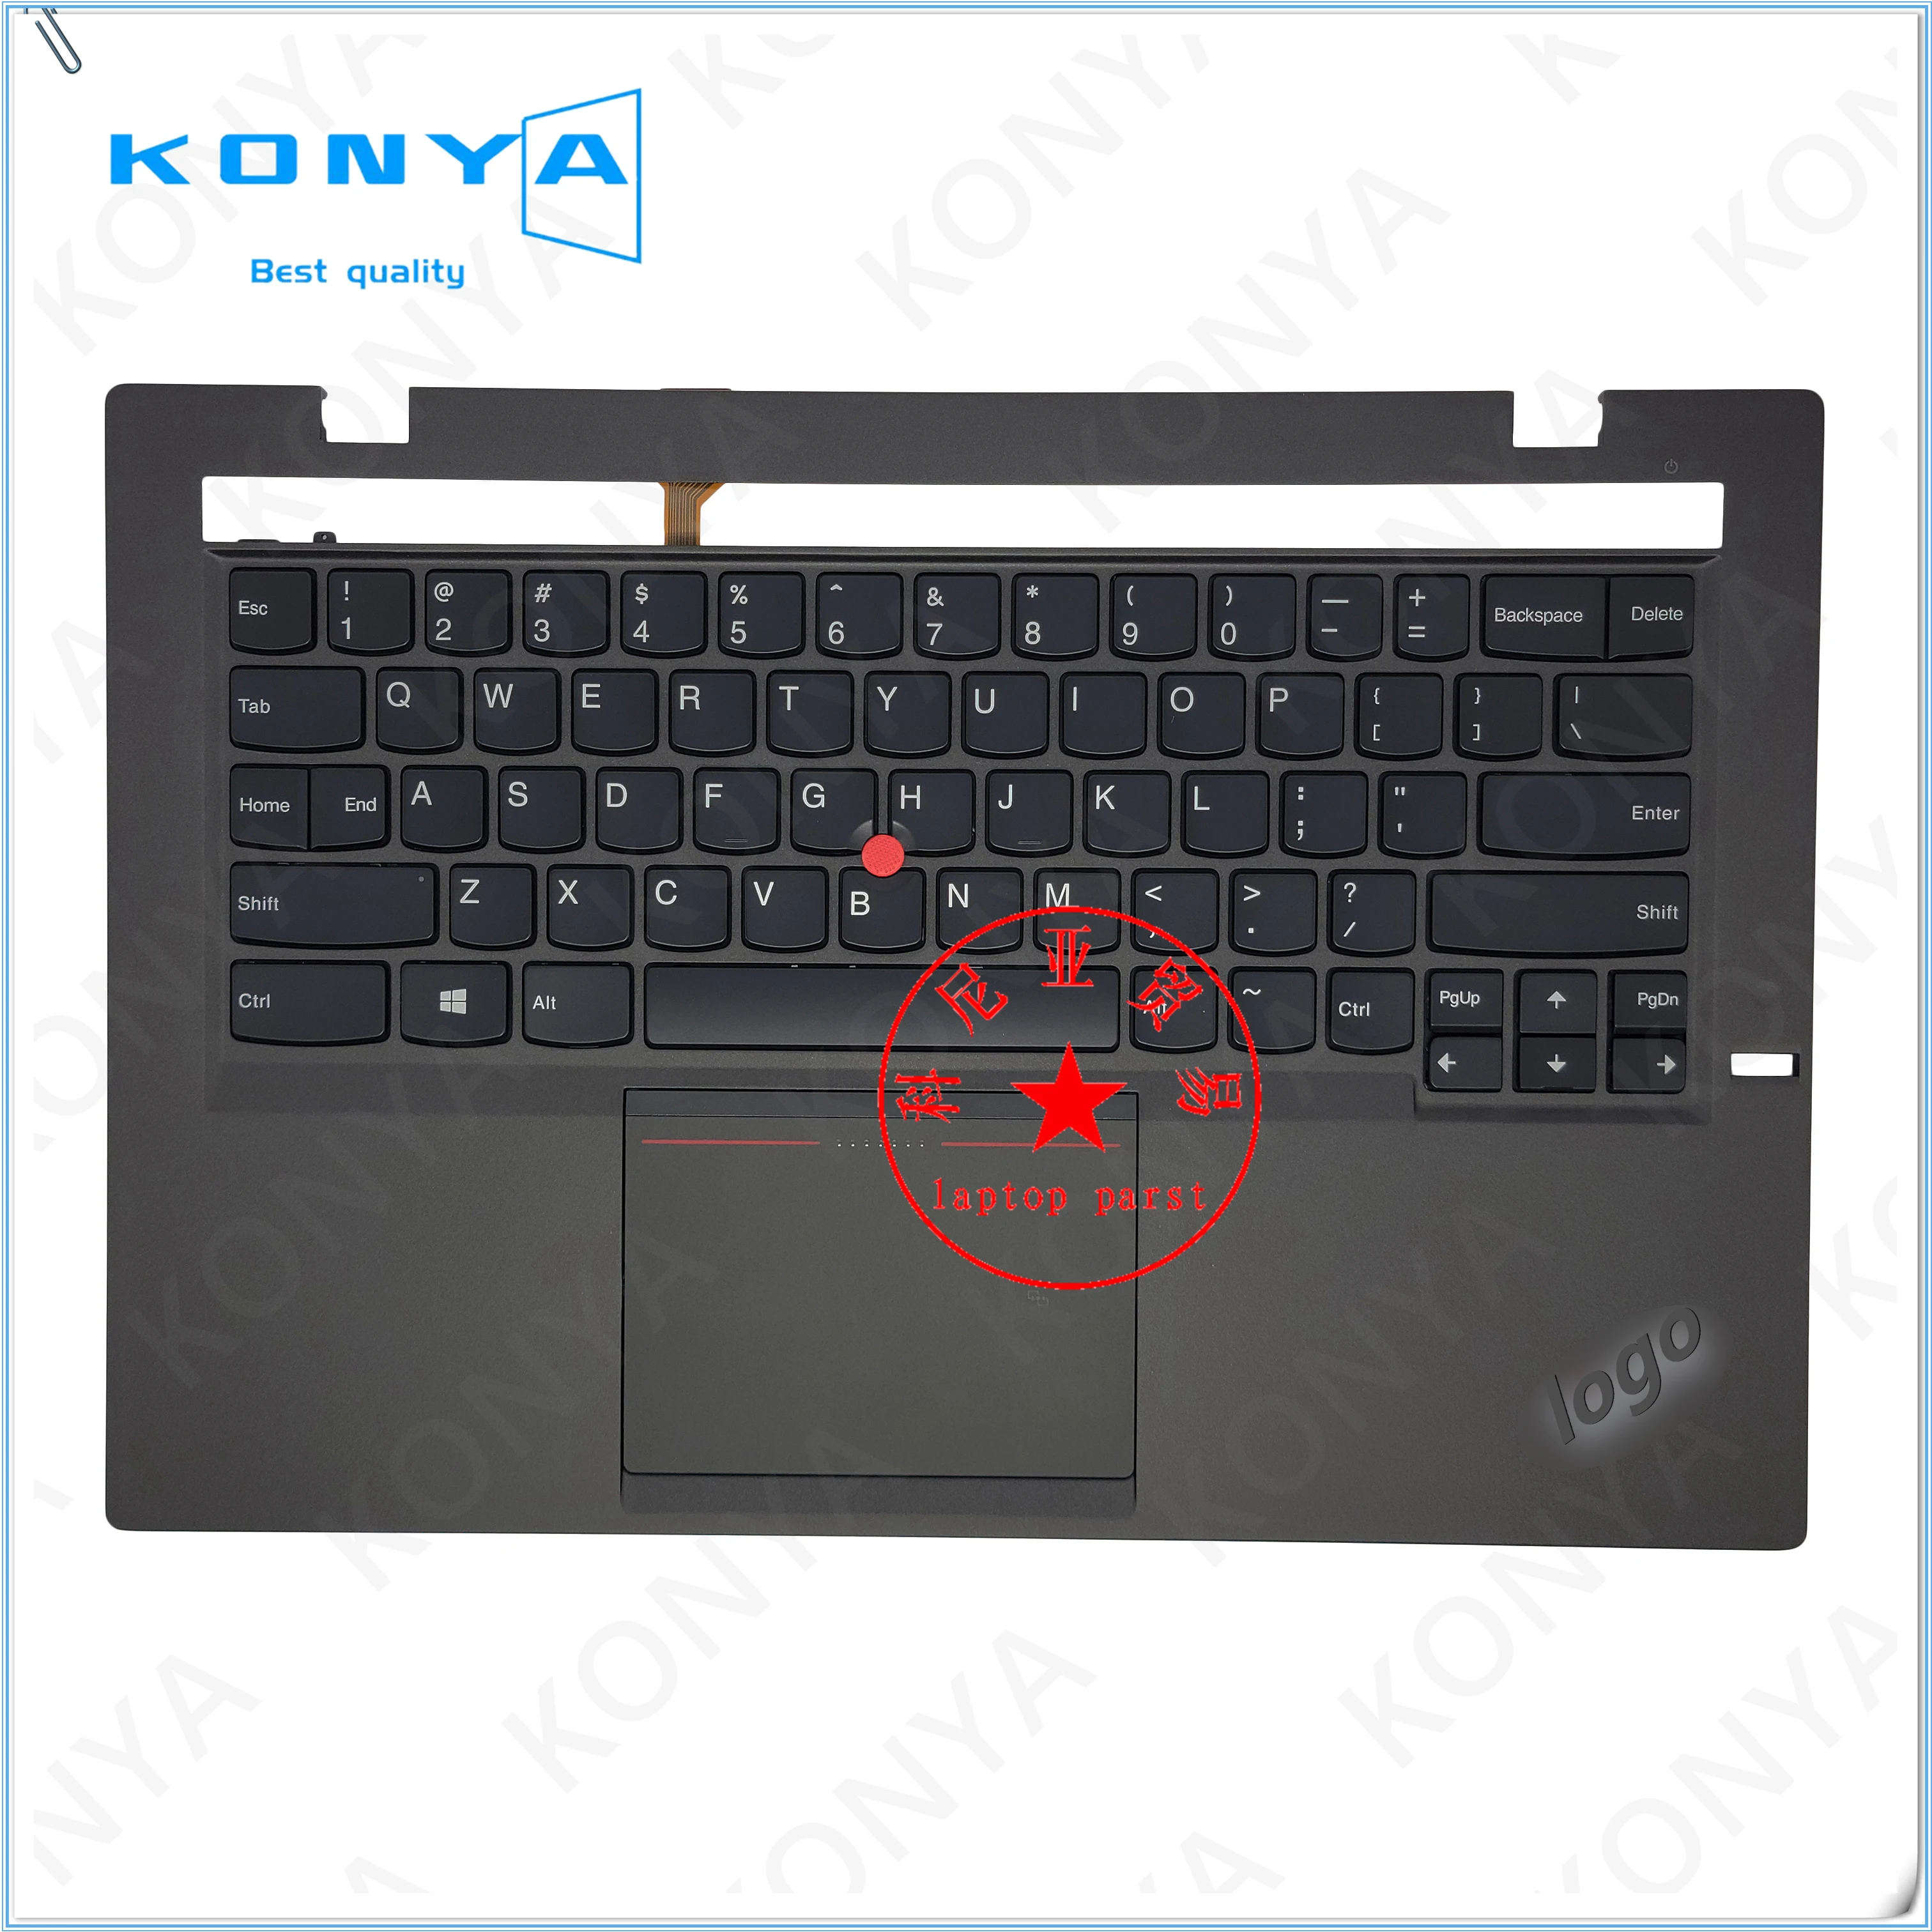 

New Original Palmrest For Lenovo Thinkpad X1 Carbon 2nd Gen Top Cover Upper Case X1C 2014 With US Keyboard 04X6562 0C45069